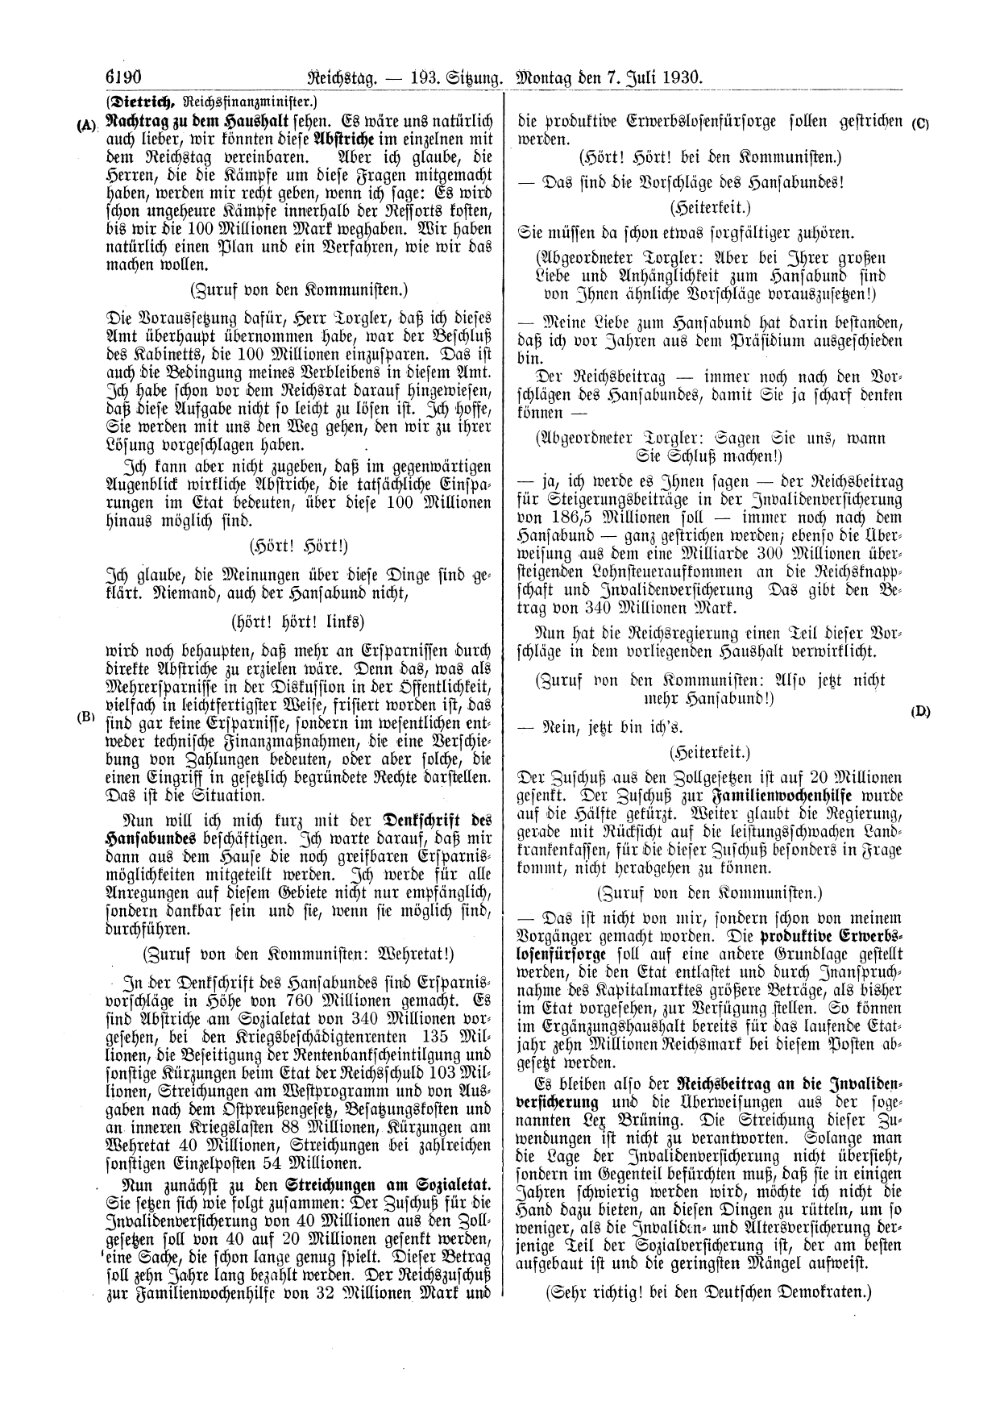 Scan of page 6190